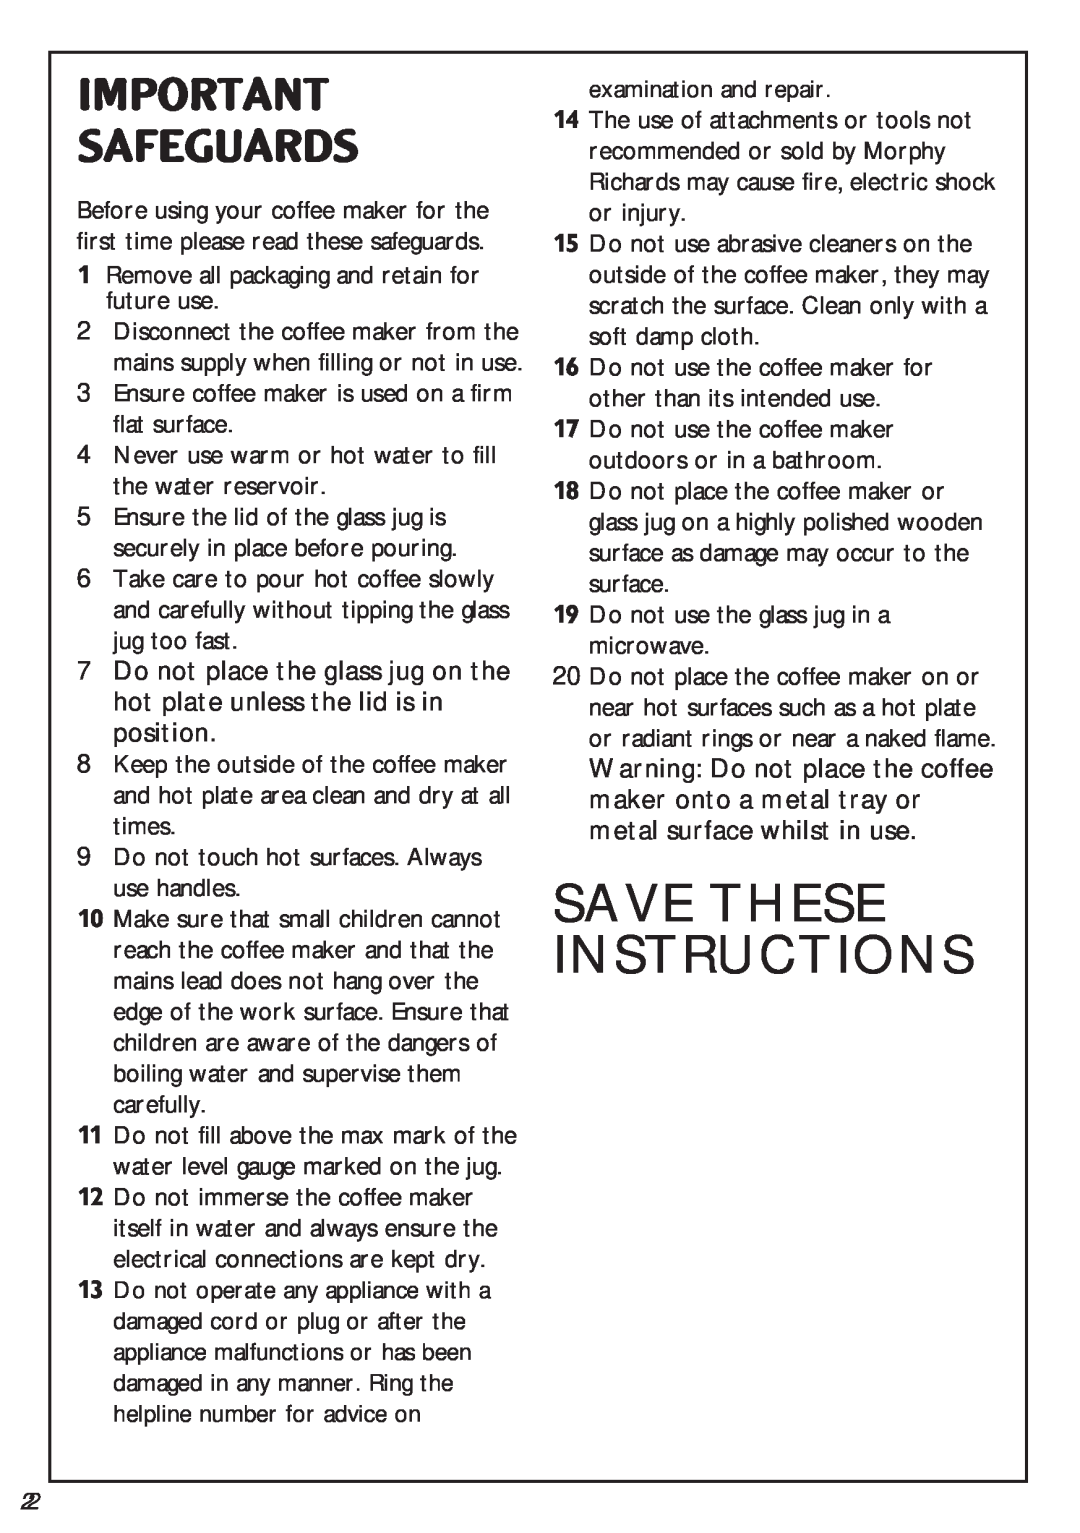 Morphy Richards Series 2000 manual Safeguards, Save These Instructions 